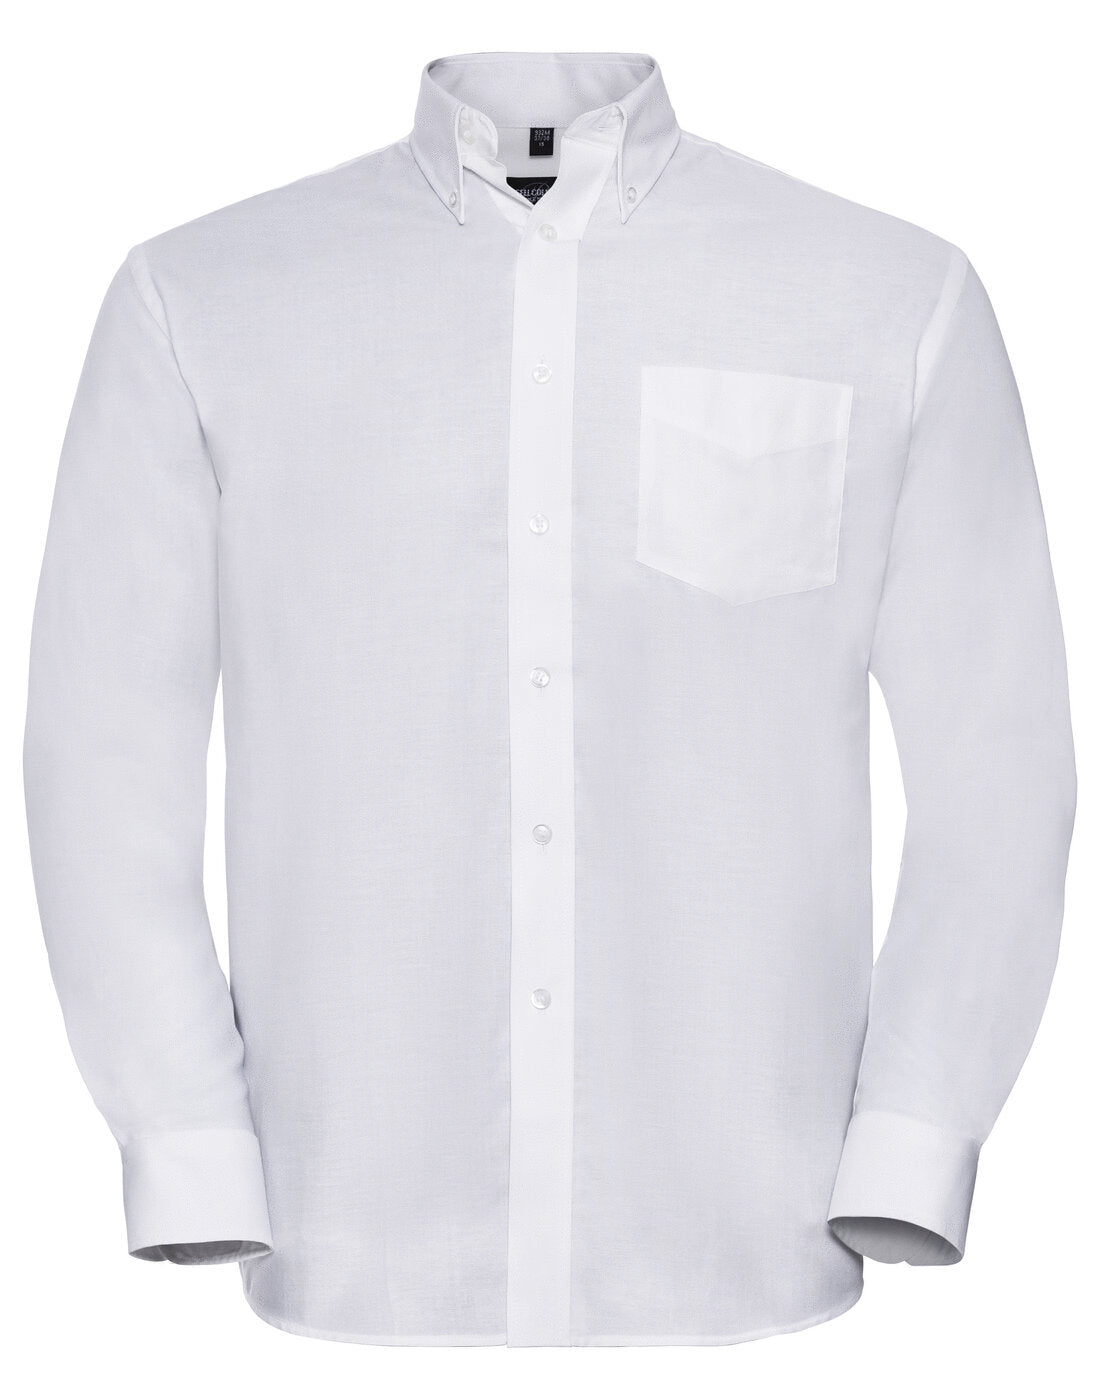 Russell Mens Long Sleeve Oxford Shirt White